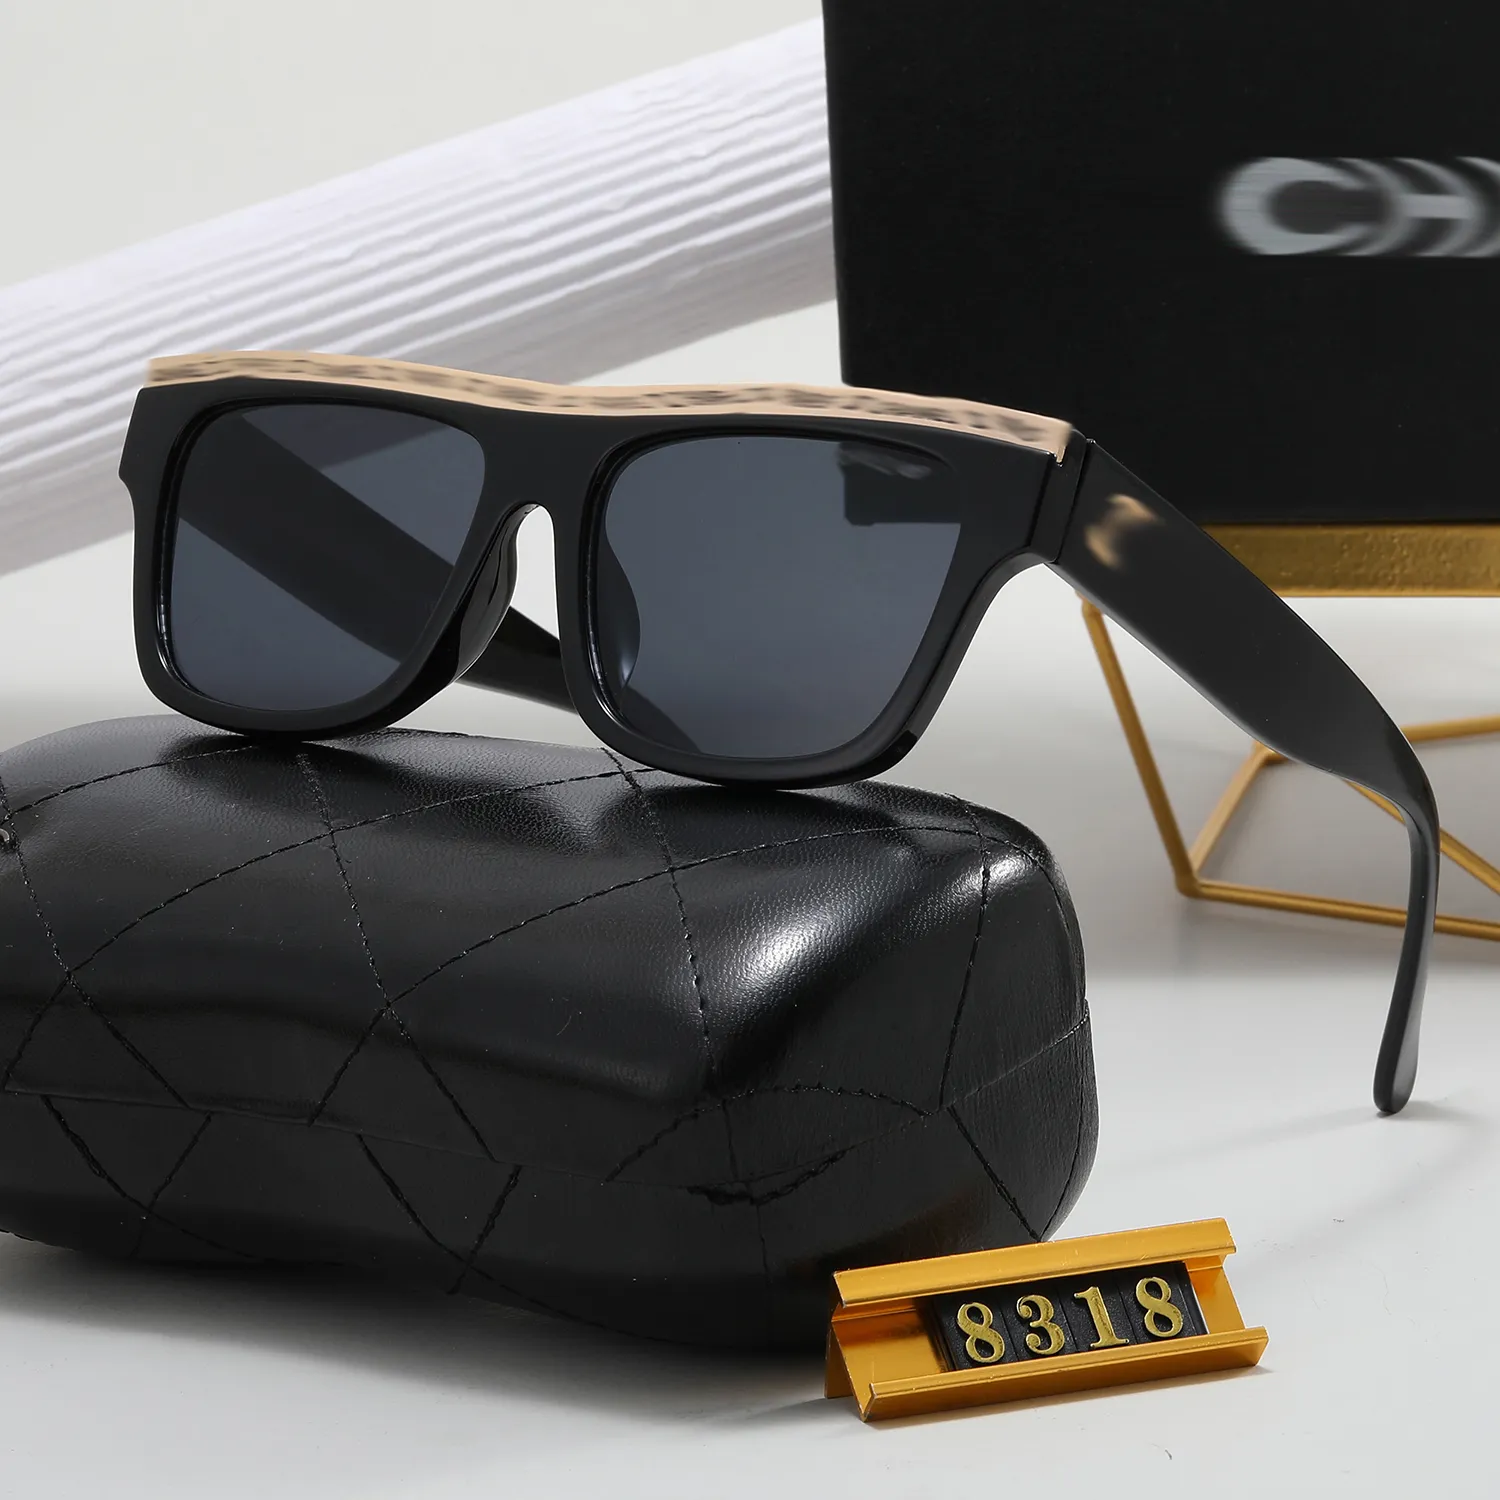 Stylish Square Black And Gold Sunglasses For Women And Men With Box  Fashionable Eyewear And Accessory From Brandsluxurys, $1.34